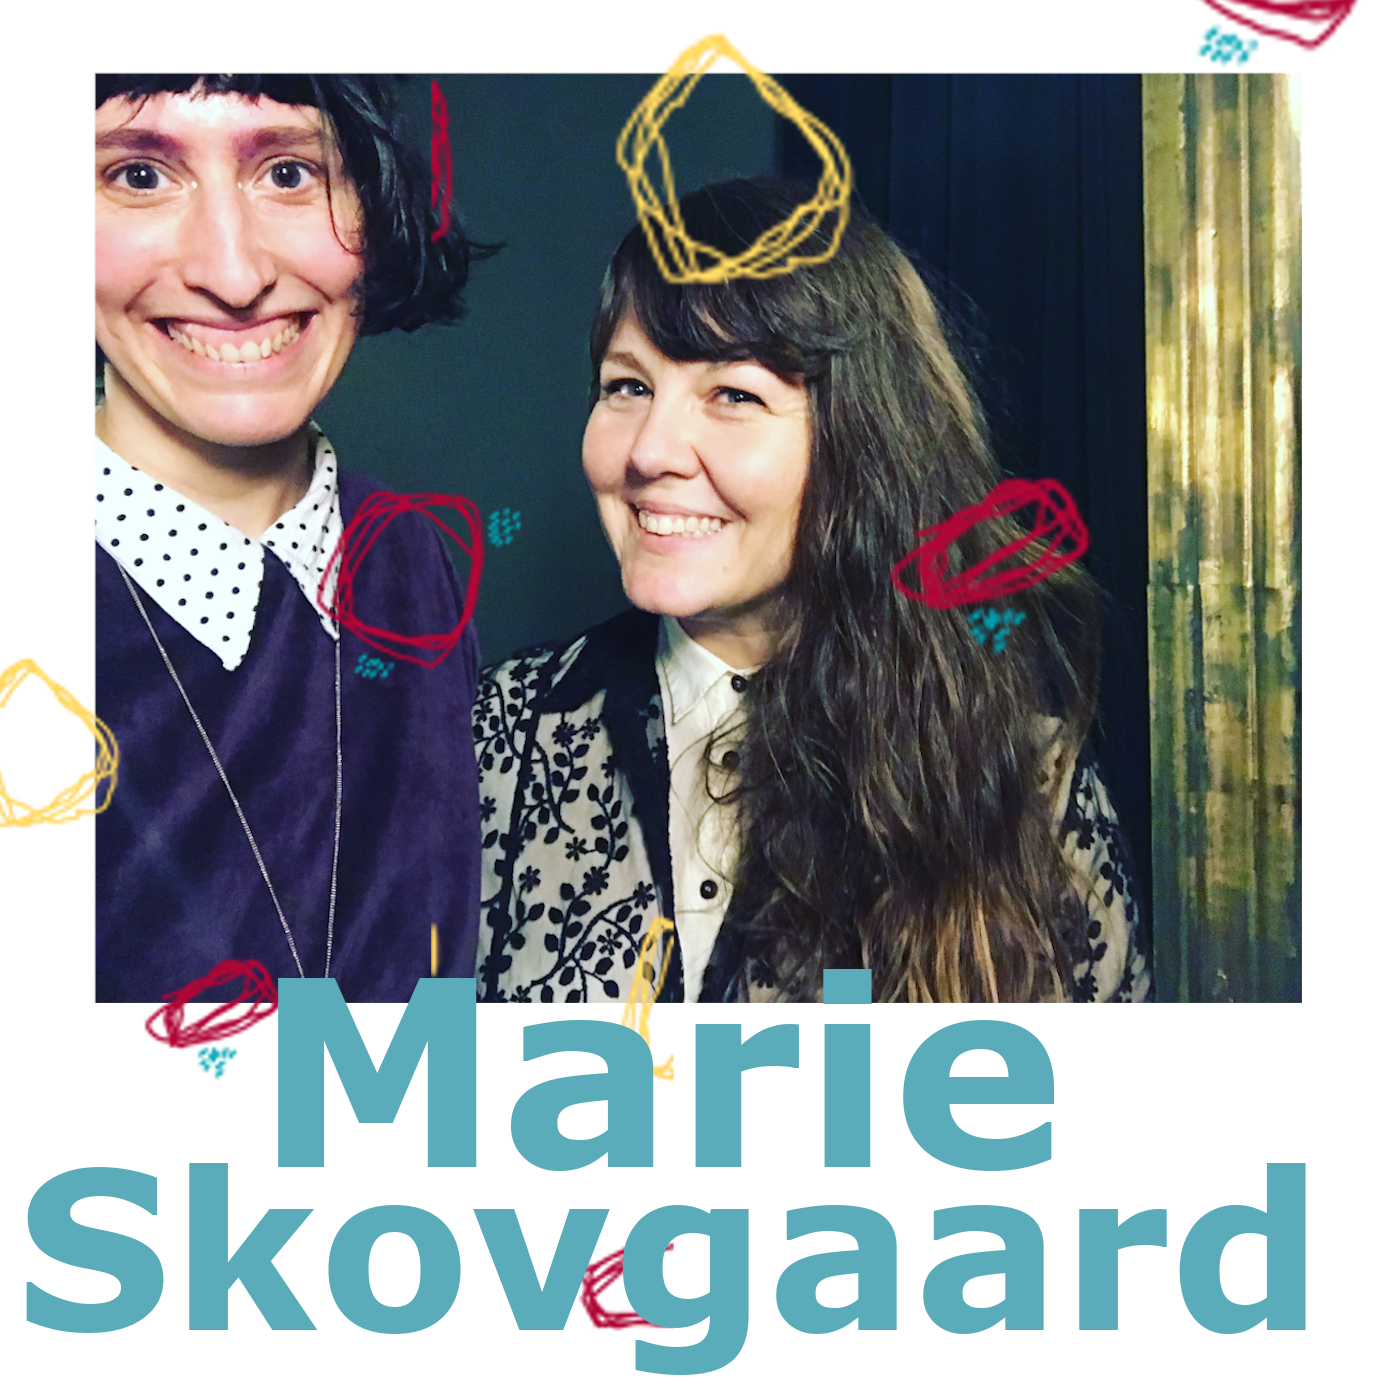 cover art for Marie Skovgaard: "You can't please everyone" SPECIAL Episode